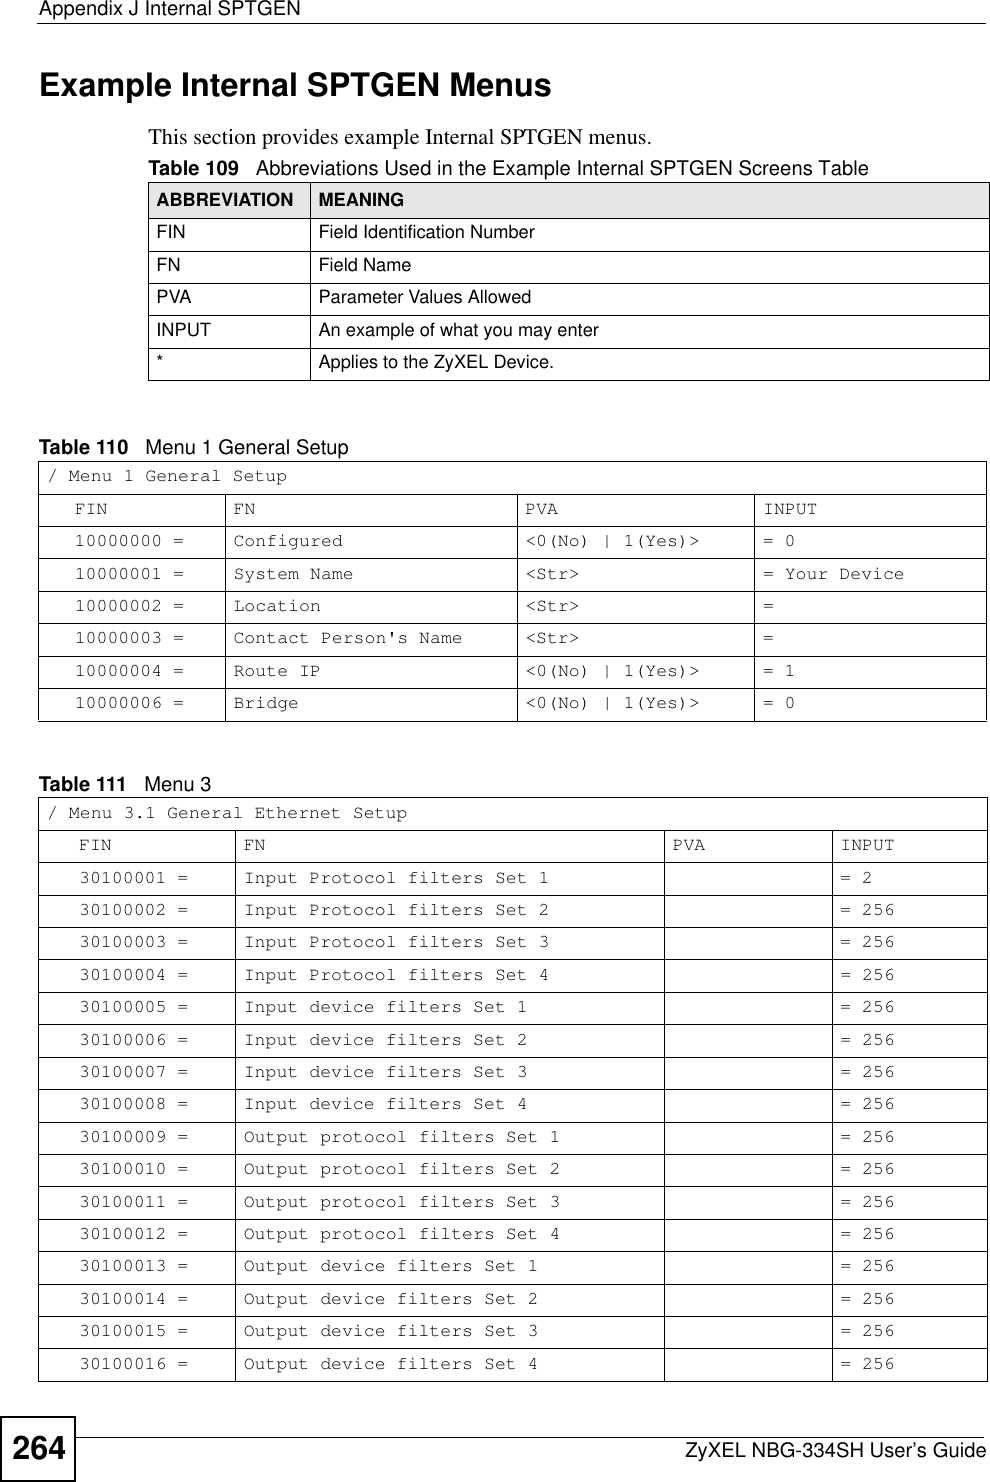 Appendix J Internal SPTGENZyXEL NBG-334SH User’s Guide264Example Internal SPTGEN MenusThis section provides example Internal SPTGEN menus. Table 109   Abbreviations Used in the Example Internal SPTGEN Screens TableABBREVIATION MEANINGFIN Field Identification Number FN Field NamePVA Parameter Values AllowedINPUT An example of what you may enter* Applies to the ZyXEL Device.Table 110   Menu 1 General Setup / Menu 1 General Setup FIN FN PVA INPUT  10000000 =  Configured &lt;0(No) | 1(Yes)&gt;  = 010000001 =  System Name &lt;Str&gt; = Your Device10000002 = Location &lt;Str&gt; =10000003 = Contact Person&apos;s Name &lt;Str&gt; =10000004 = Route IP &lt;0(No) | 1(Yes)&gt;  = 110000006 = Bridge &lt;0(No) | 1(Yes)&gt;  = 0Table 111   Menu 3/ Menu 3.1 General Ethernet Setup FIN FN PVA INPUT30100001 = Input Protocol filters Set 1       = 230100002 = Input Protocol filters Set 2       = 25630100003 = Input Protocol filters Set 3       = 25630100004 = Input Protocol filters Set 4  = 25630100005 = Input device filters Set 1       = 25630100006 = Input device filters Set 2  = 25630100007 = Input device filters Set 3  = 25630100008 = Input device filters Set 4  = 25630100009 = Output protocol filters Set 1  = 25630100010 = Output protocol filters Set 2  = 25630100011 = Output protocol filters Set 3  = 25630100012 = Output protocol filters Set 4  = 25630100013 = Output device filters Set 1  = 25630100014 = Output device filters Set 2  = 25630100015 = Output device filters Set 3  = 25630100016 = Output device filters Set 4  = 256